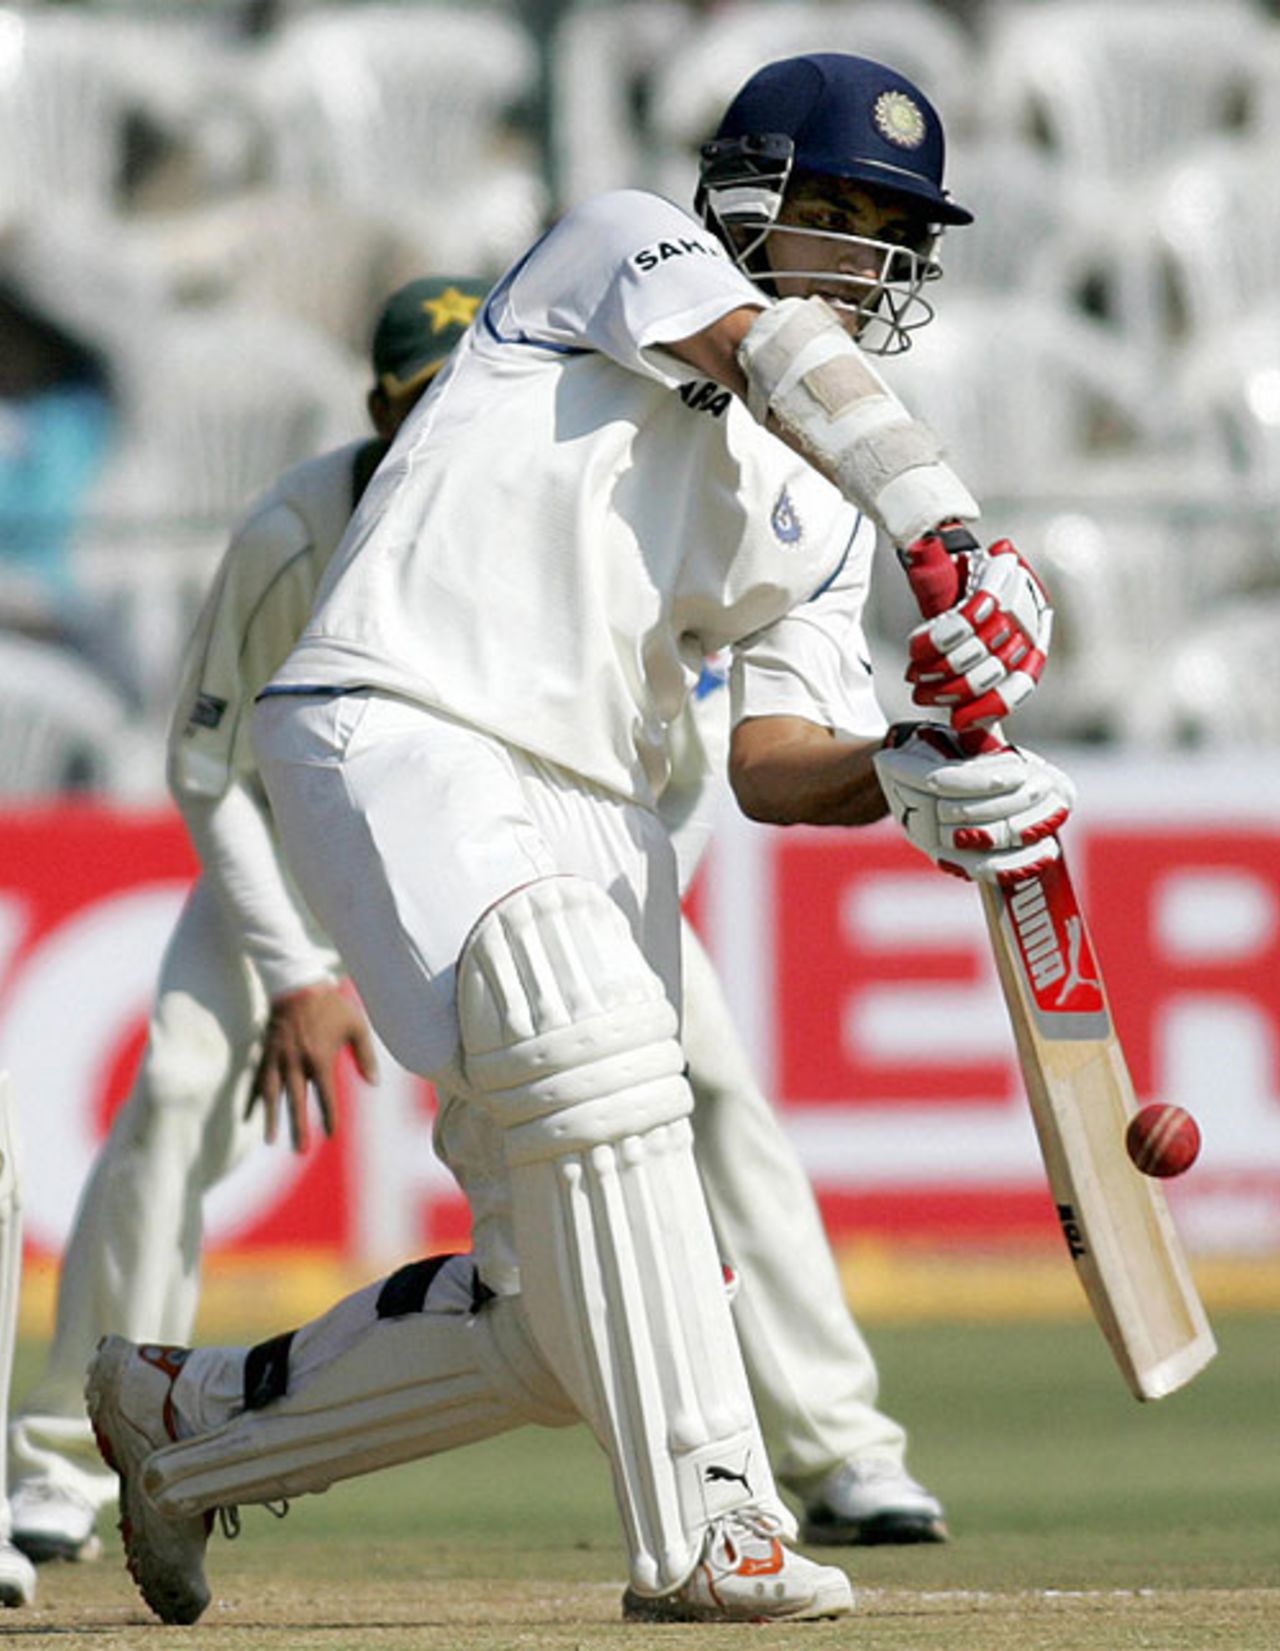 Sourav Ganguly hits out early on day five, India v Pakistan, 3rd Test, Bangalore, 5th day, December 12, 2007 

